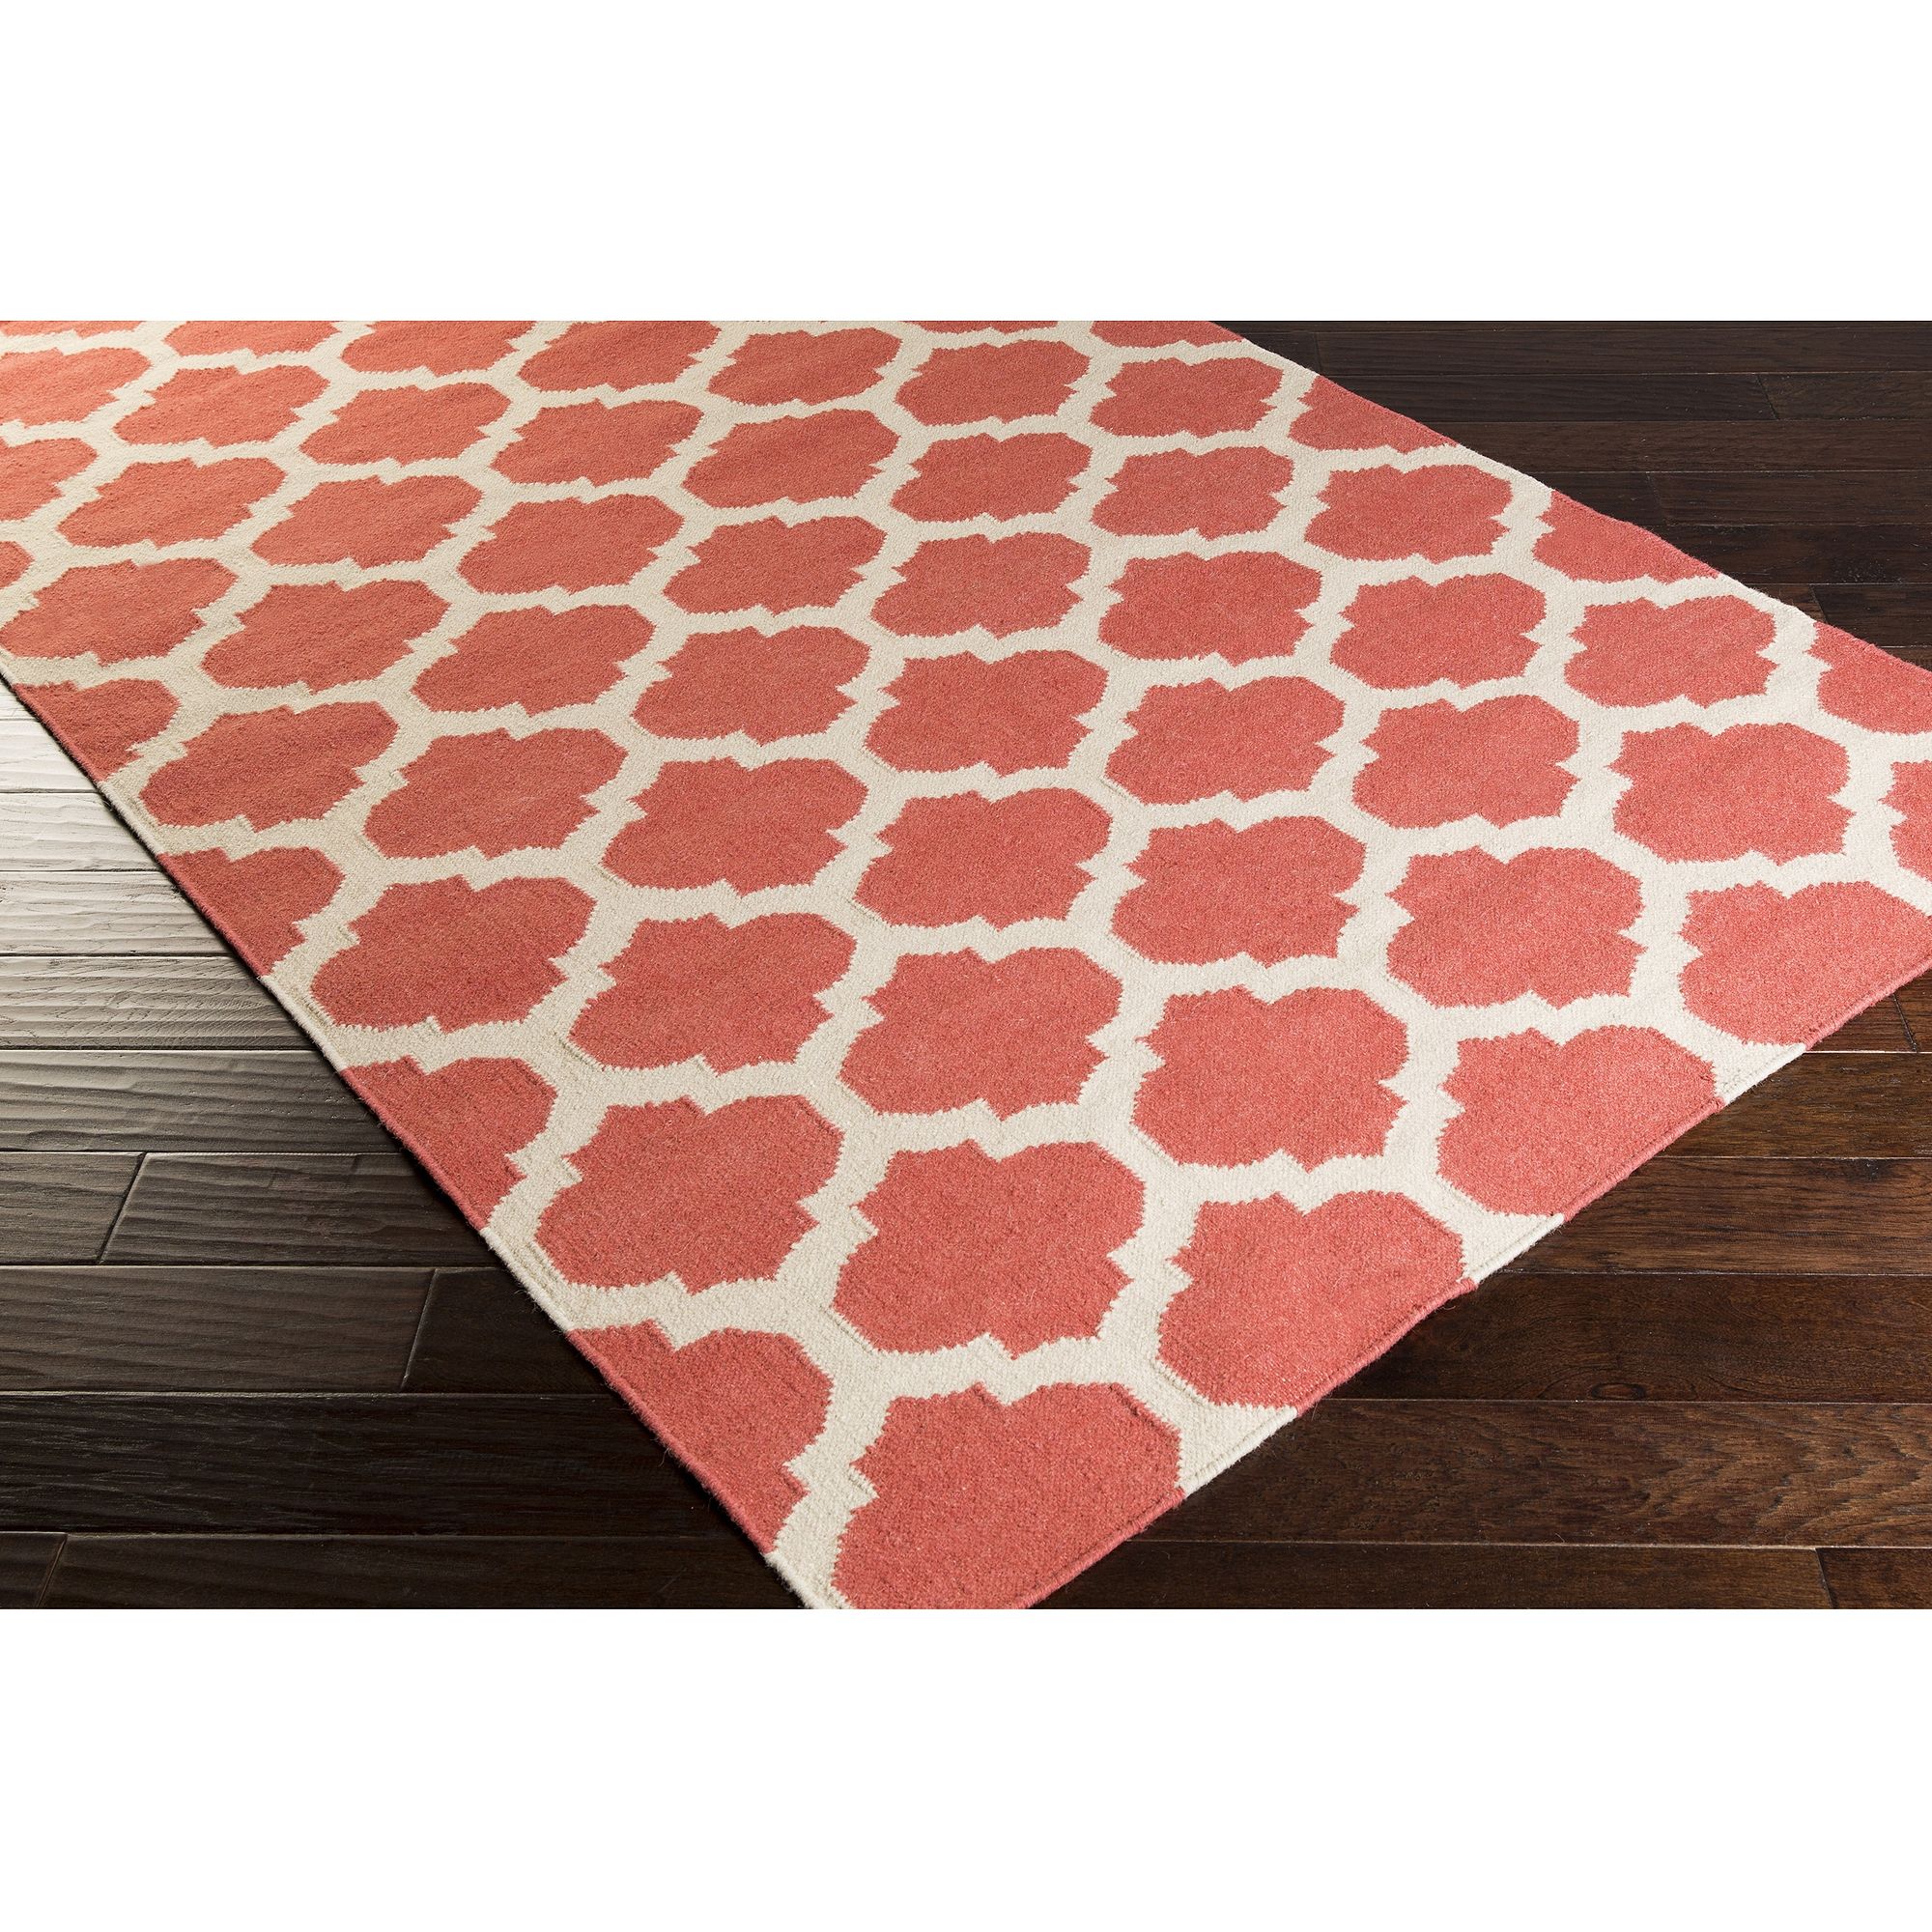 Large Wool Area Rugs Roselawnlutheran Throughout Wool Area Rugs 10×14 (Photo 11 of 15)